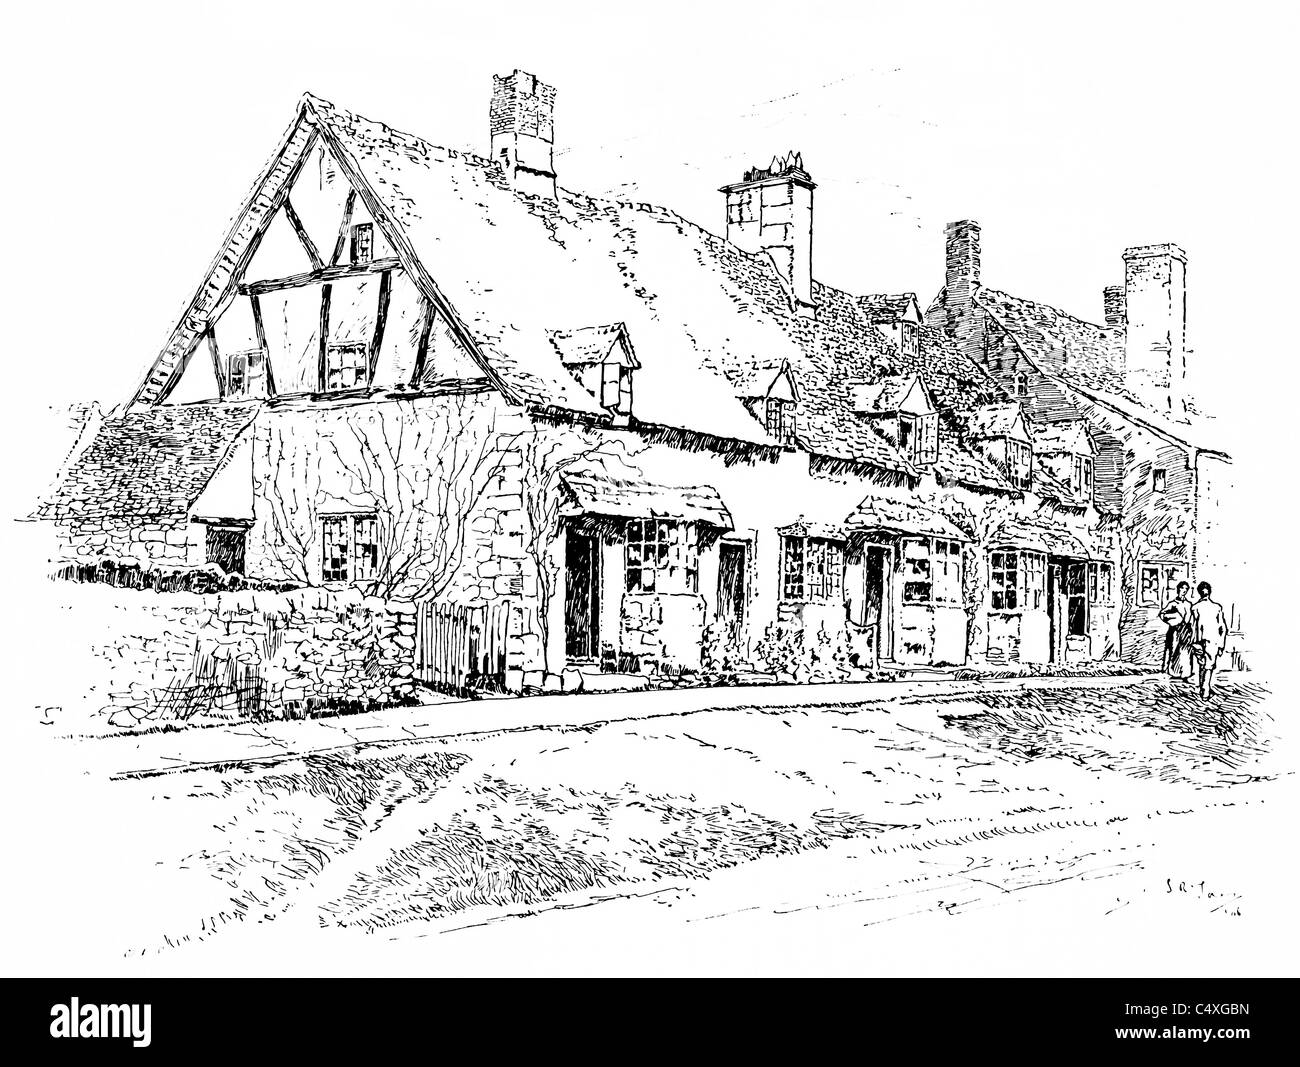 Broadway, Worcestershire - pen and ink illustration from 'Old English Country Cottages' by Charles Holme, 1906. Stock Photo